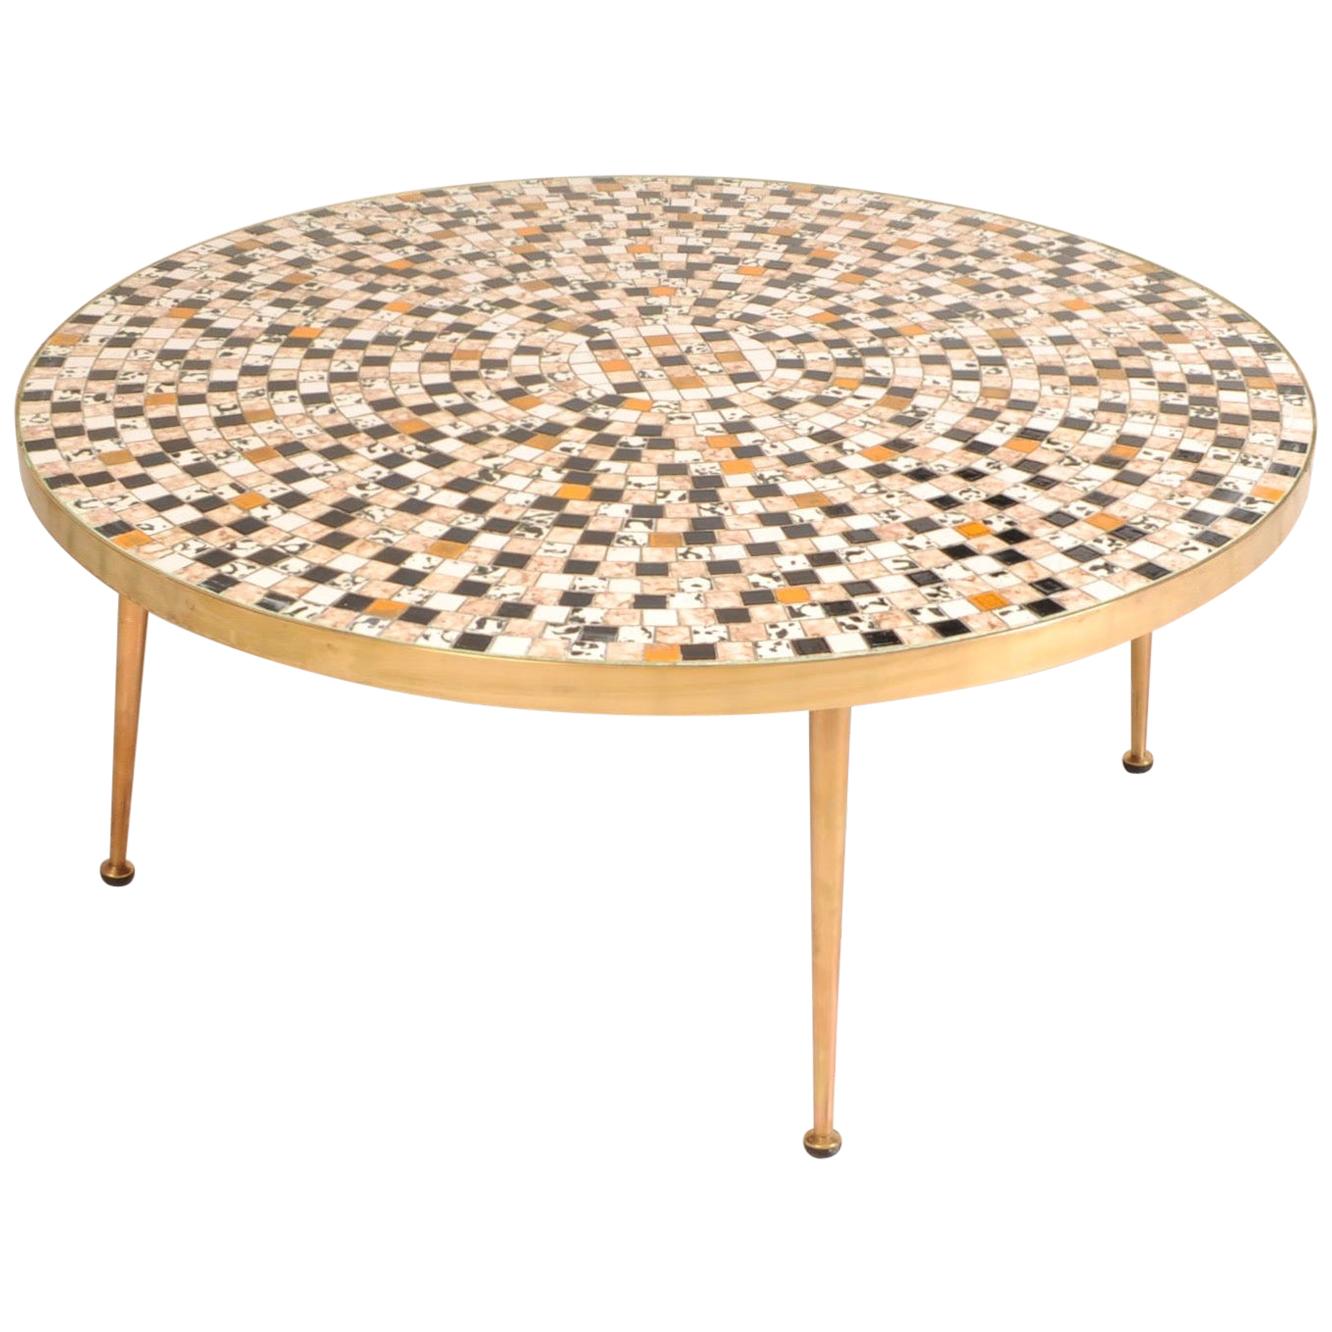 Midcentury Brass Tile Topped Coffee Table